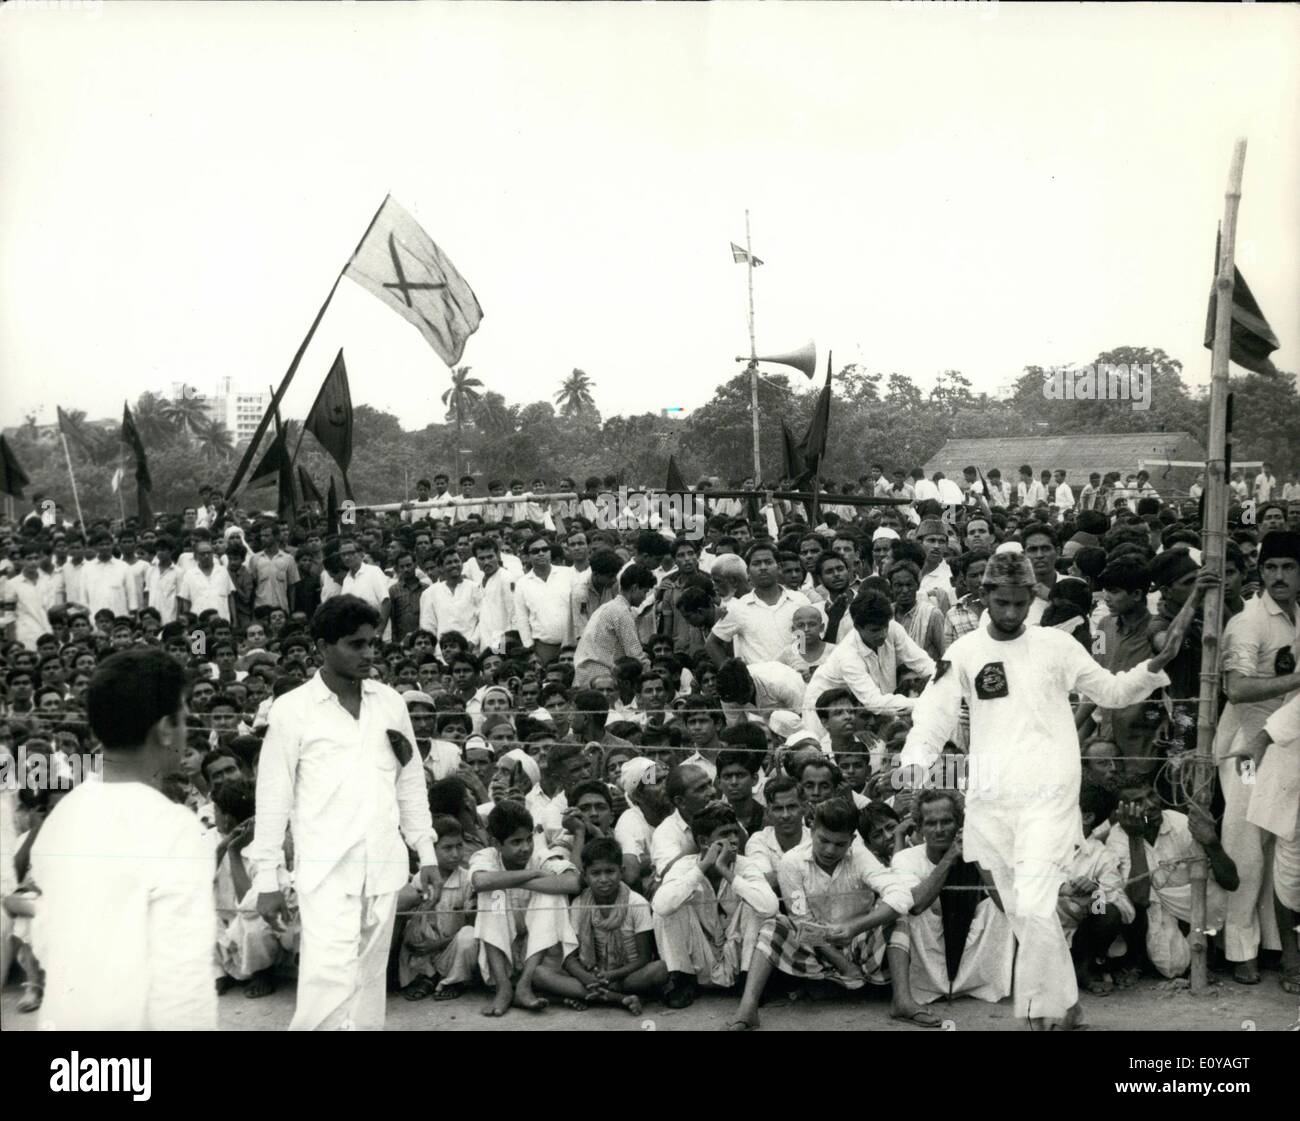 Sep. 09, 1969 - Massive Anti-Israel Demonstration in India.: Muslims in different parts of India observed ''Protest Day'' last Friday (Aug 29) to condemn the burning of the Al Aqsa mosque in Jerusalem. They kept their shops closed, marched street in processions wearing black badges and carrying black flags, held rallies and raised black flags on housetops. In Calcutta over 500,000 Muslims attended the central rally in the City. It adopted a resolution condemning Britain, the U.S.A., West Germany and other for ''siding with Israel which has been violating the U.N Stock Photo